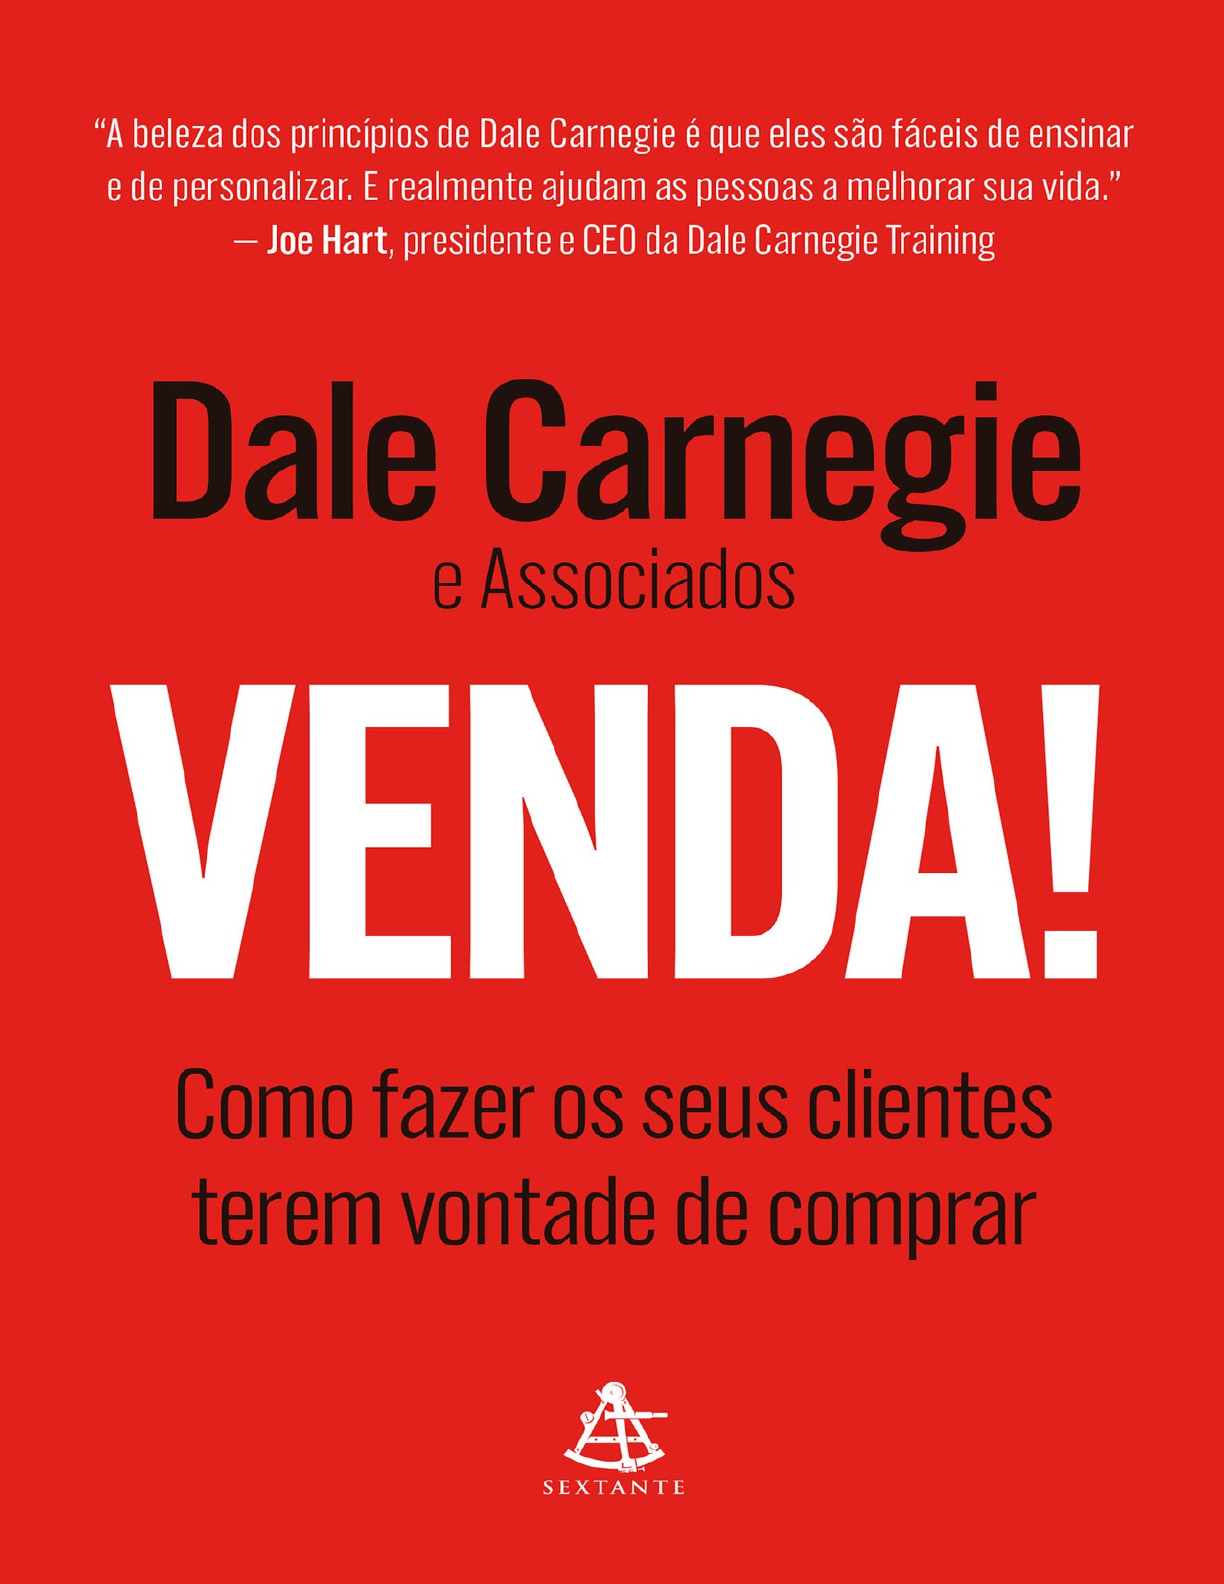 Dale Carnegie Golden Book - Apps on Google Play